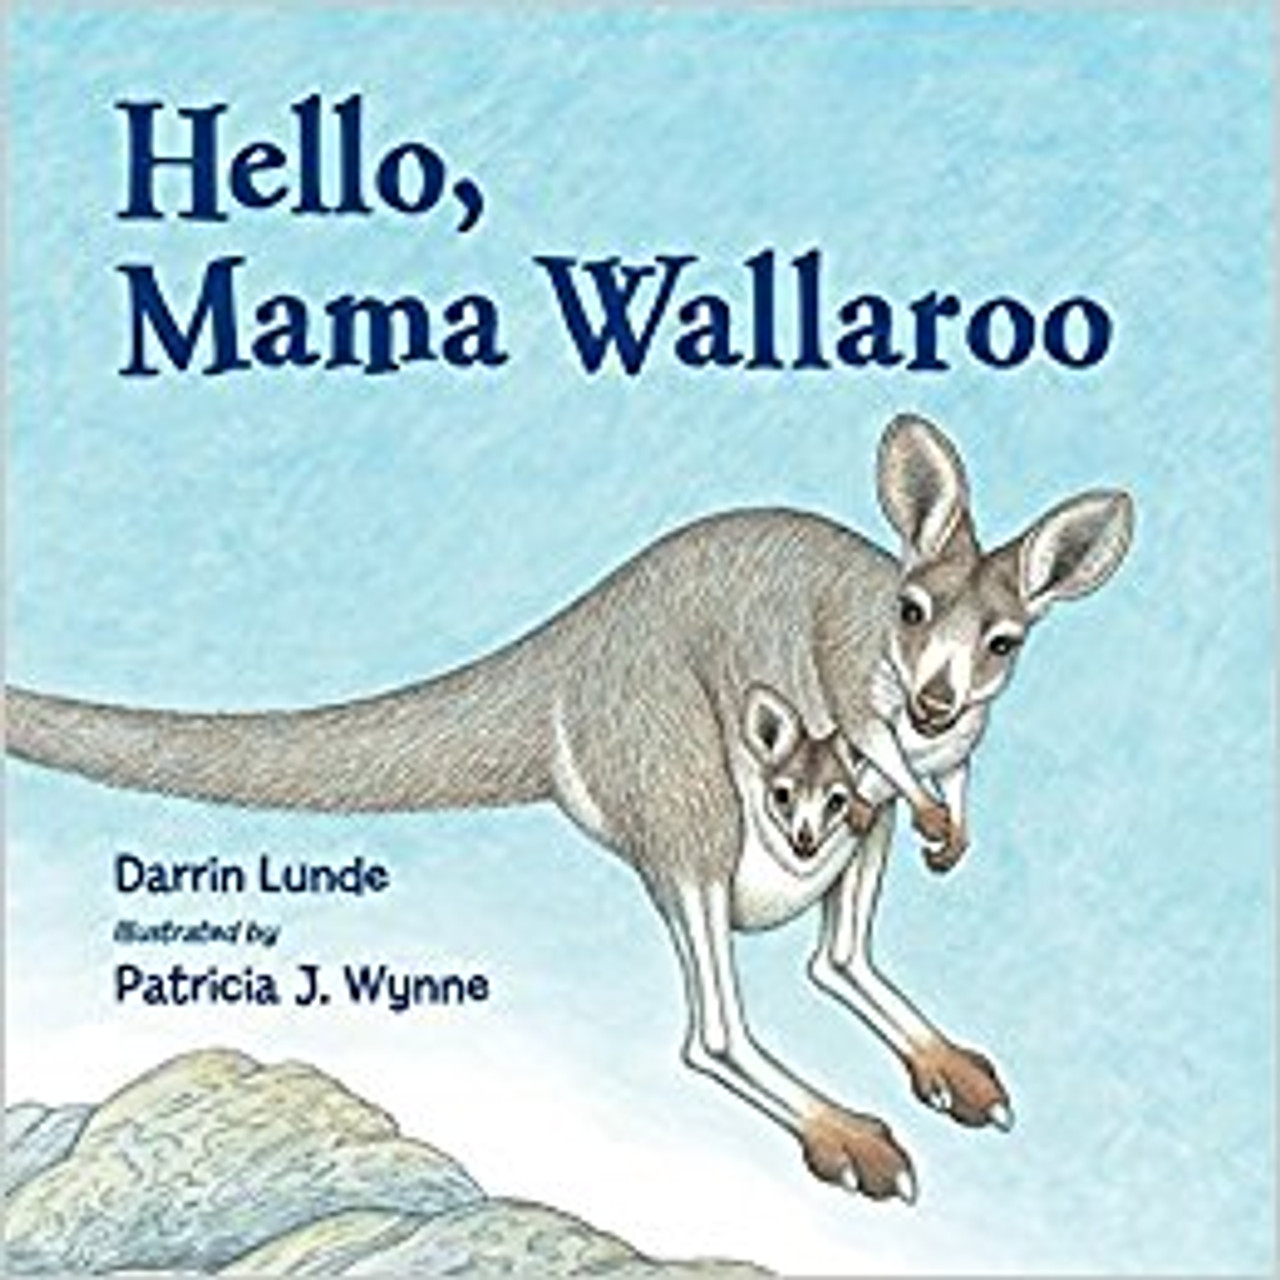 This simple picture book answers a series of questions about this Australian animal, giving readers just the right amount of information while offering many opportunities for further exploration.